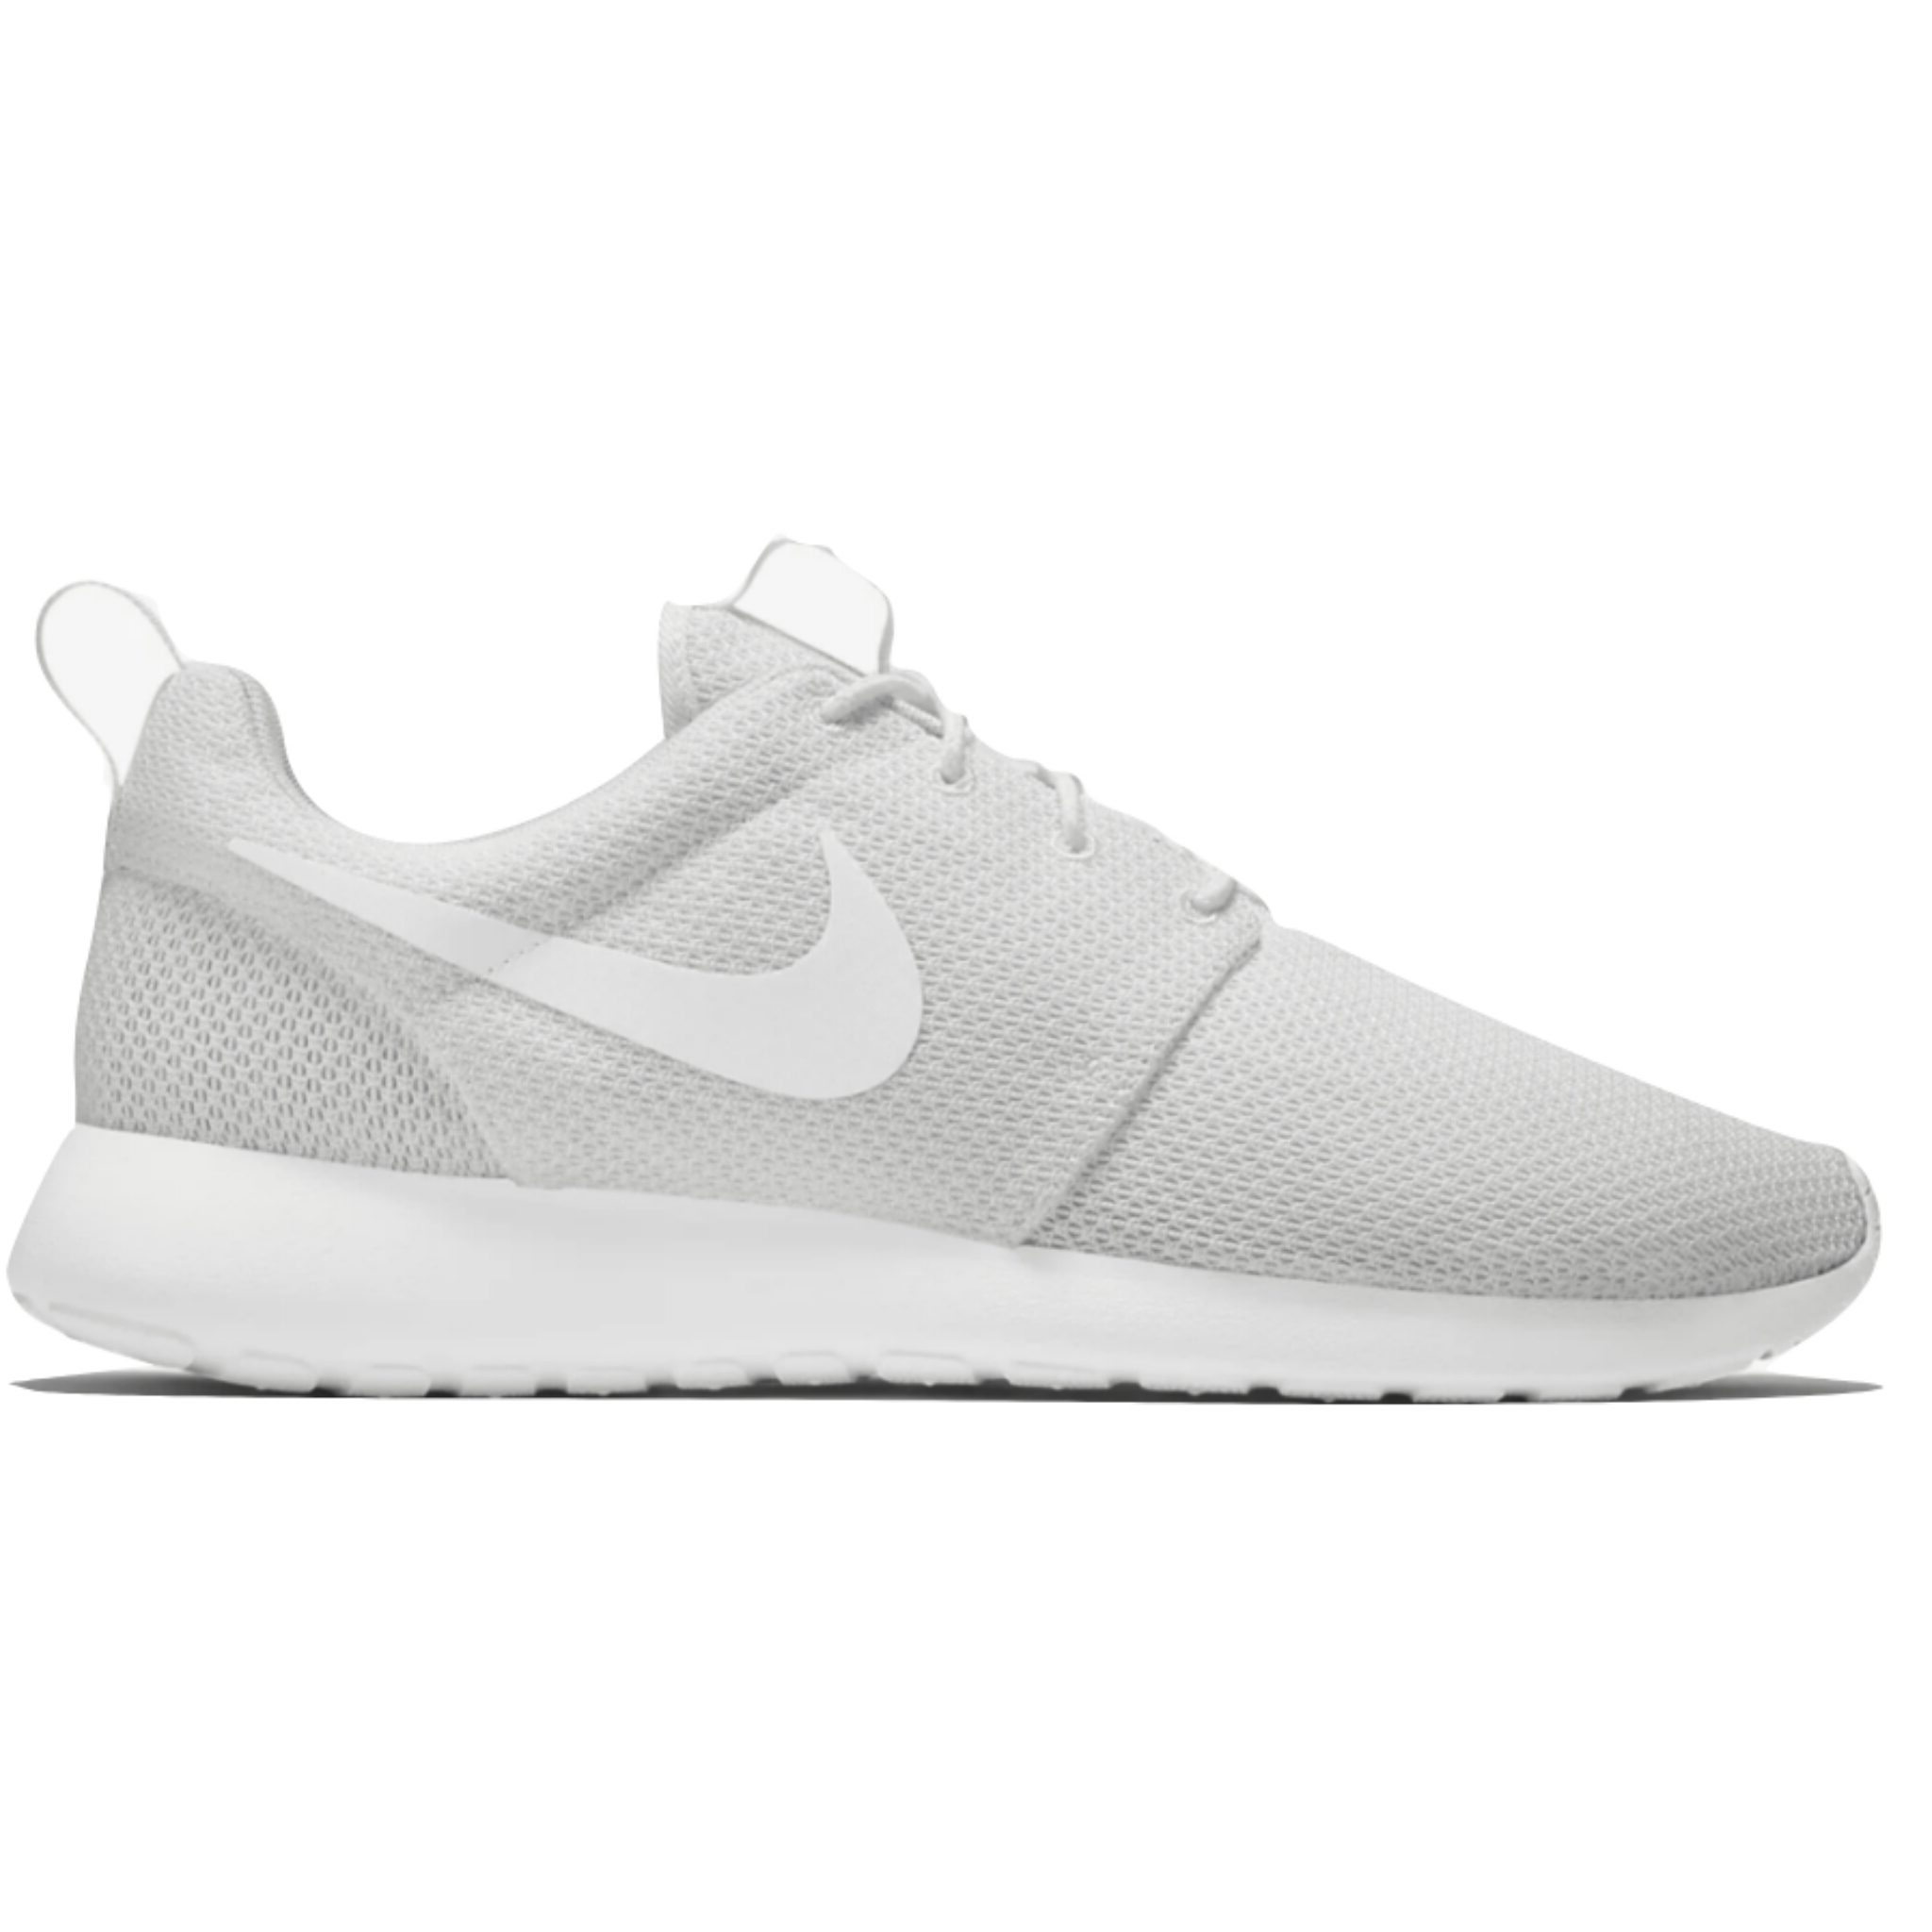 Nike Roshe One – Welcome To Our Online Shop In Pakistan